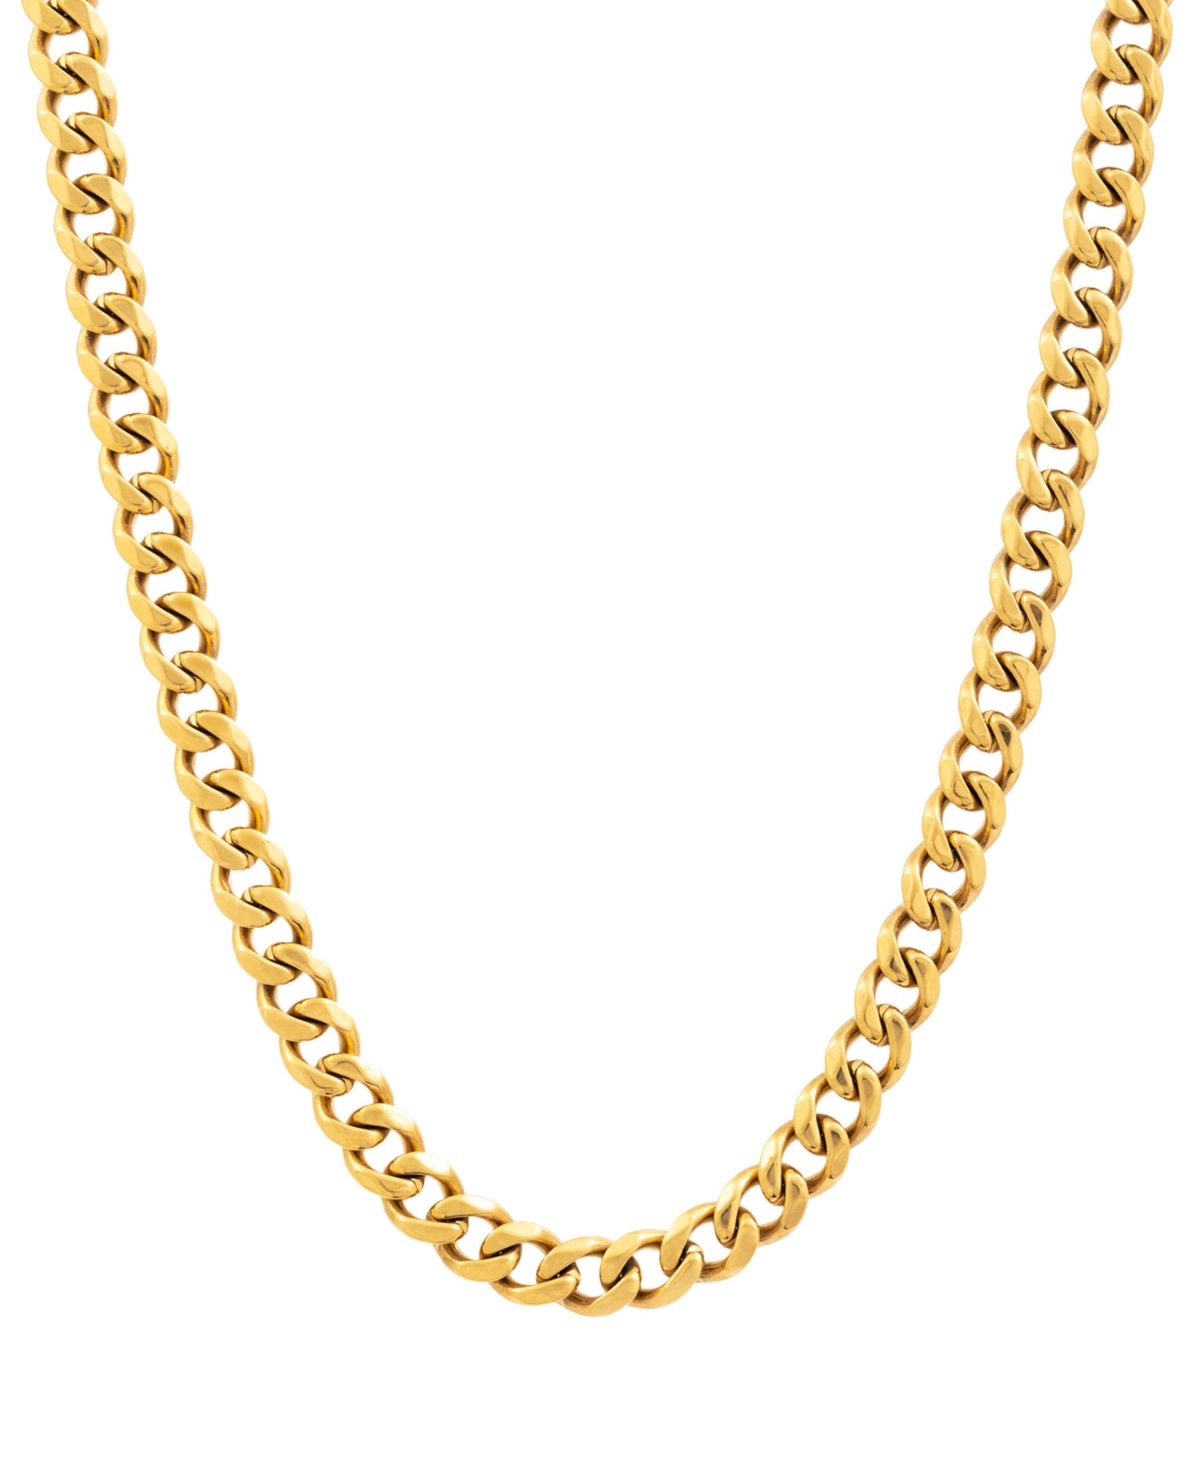 Shop Legacy For Men By Simone I. Smith Men's Flat Curb Link 24" Chain Necklace In Gold-tone